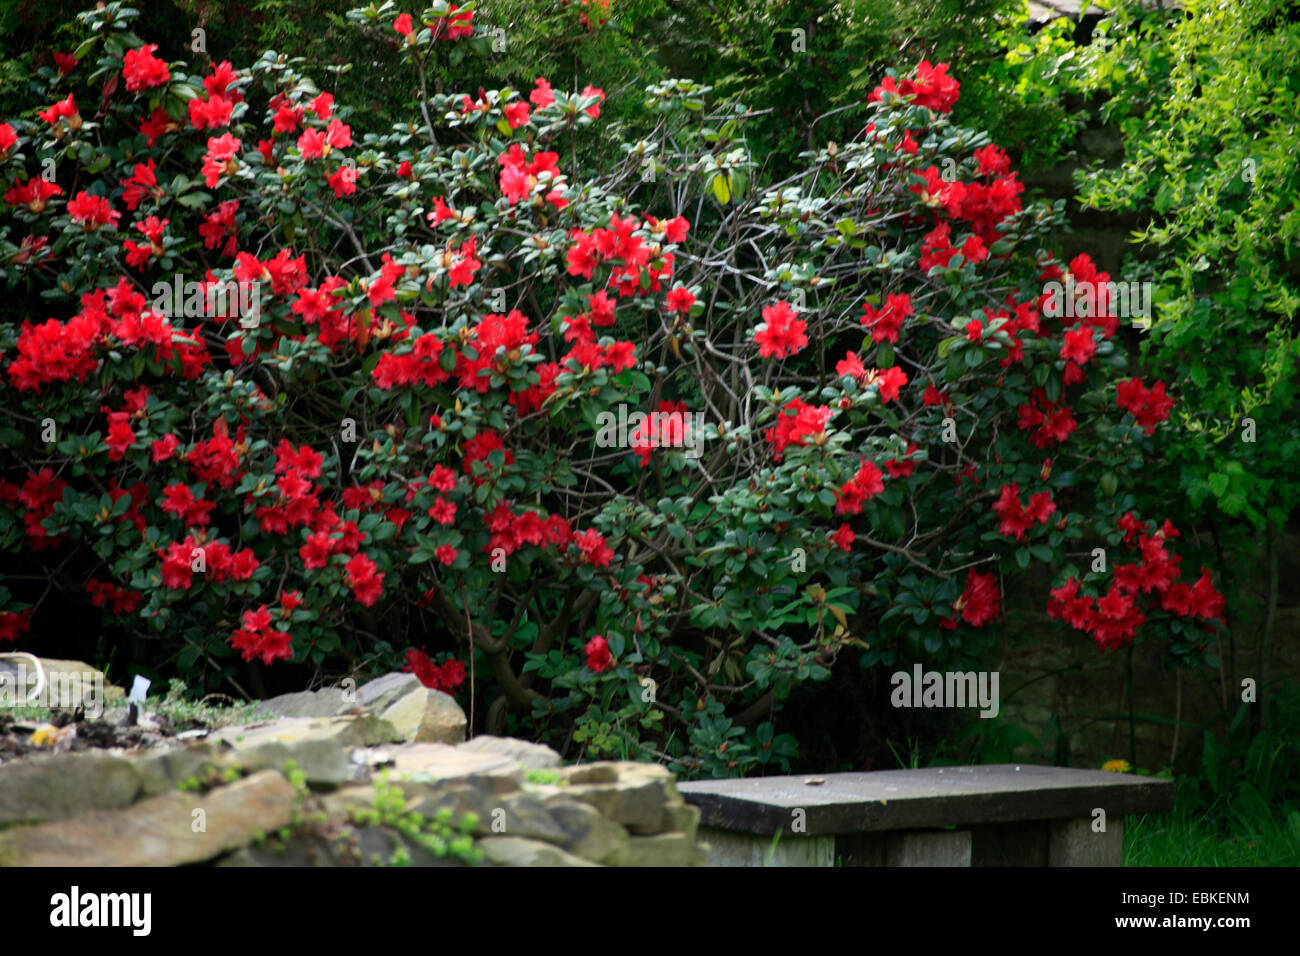 Rhododendron (Rhododendron forrestii 'Baden Rhododendron forrestii Baden Baden), cultivar Baden Baden, Stock Photo - Alamy